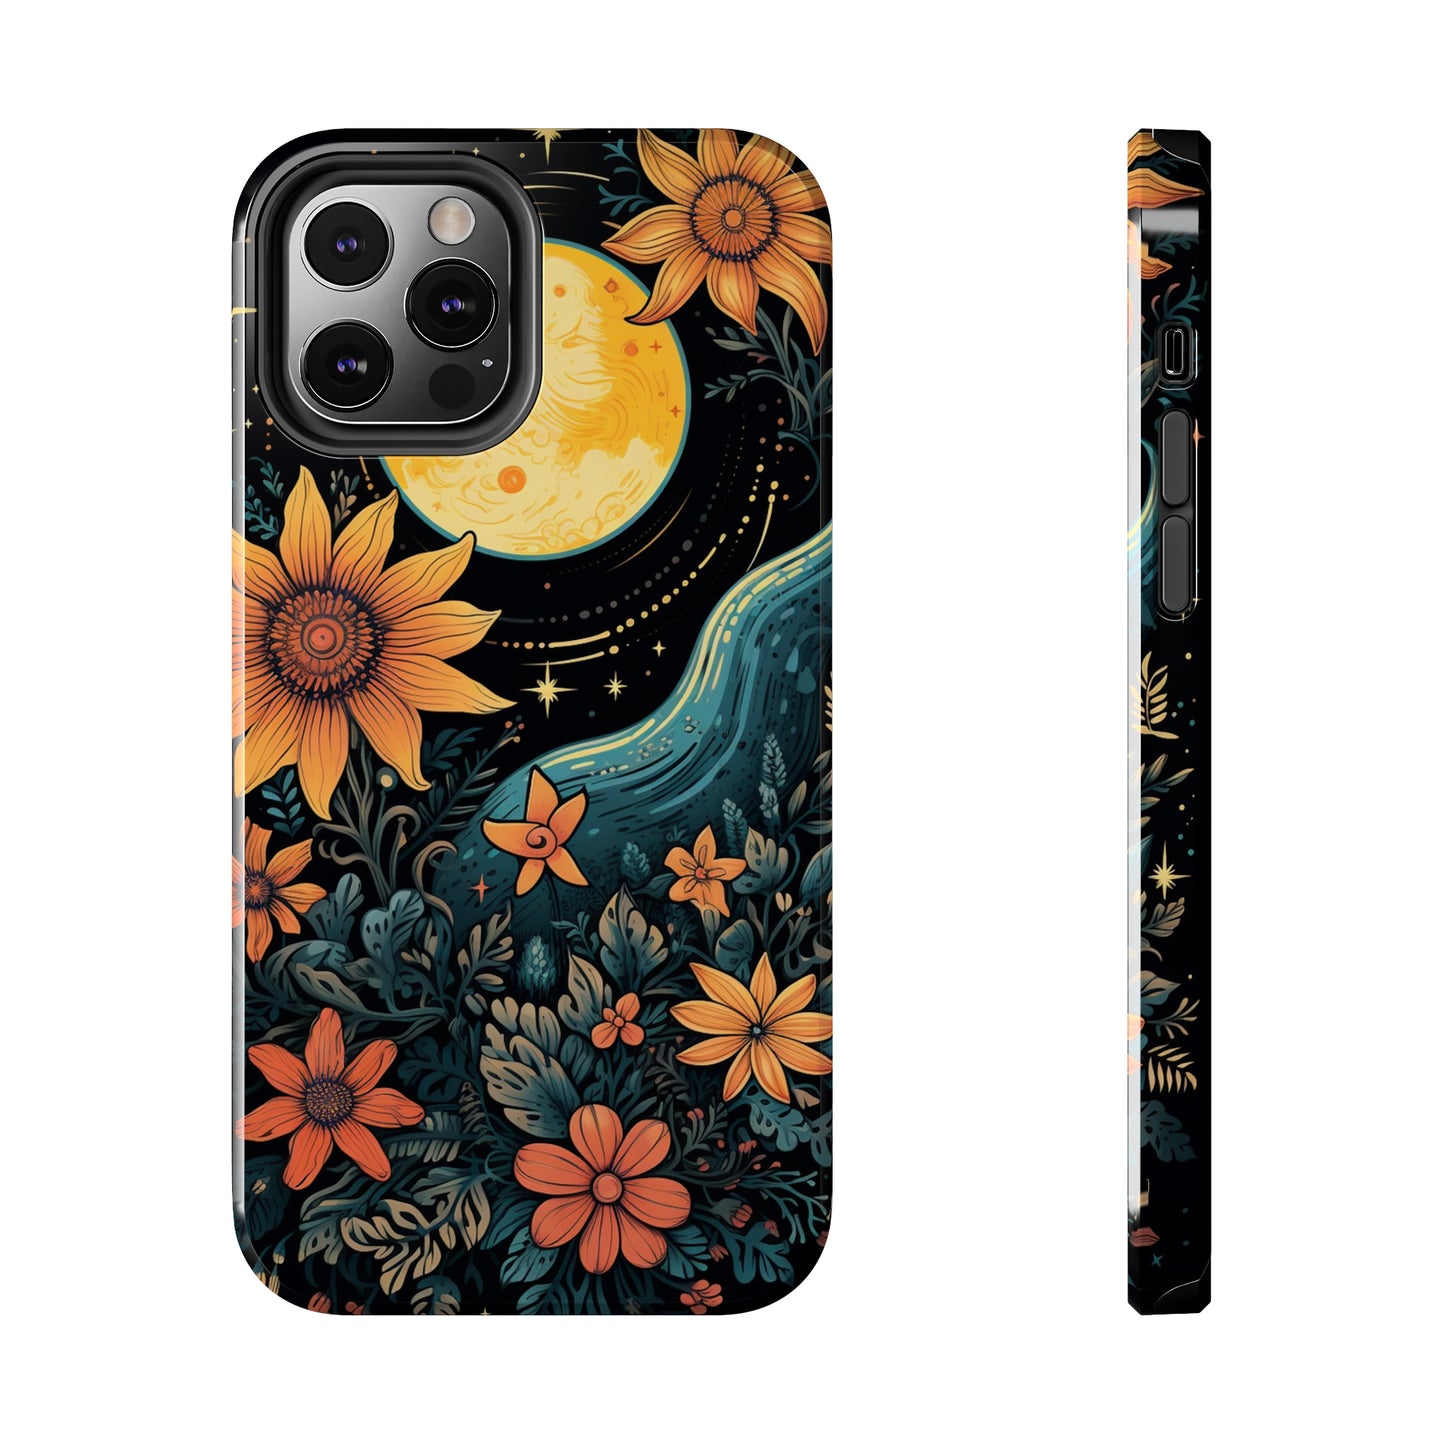 iPhone 8 and X case symbolizing rustic and celestial harmony